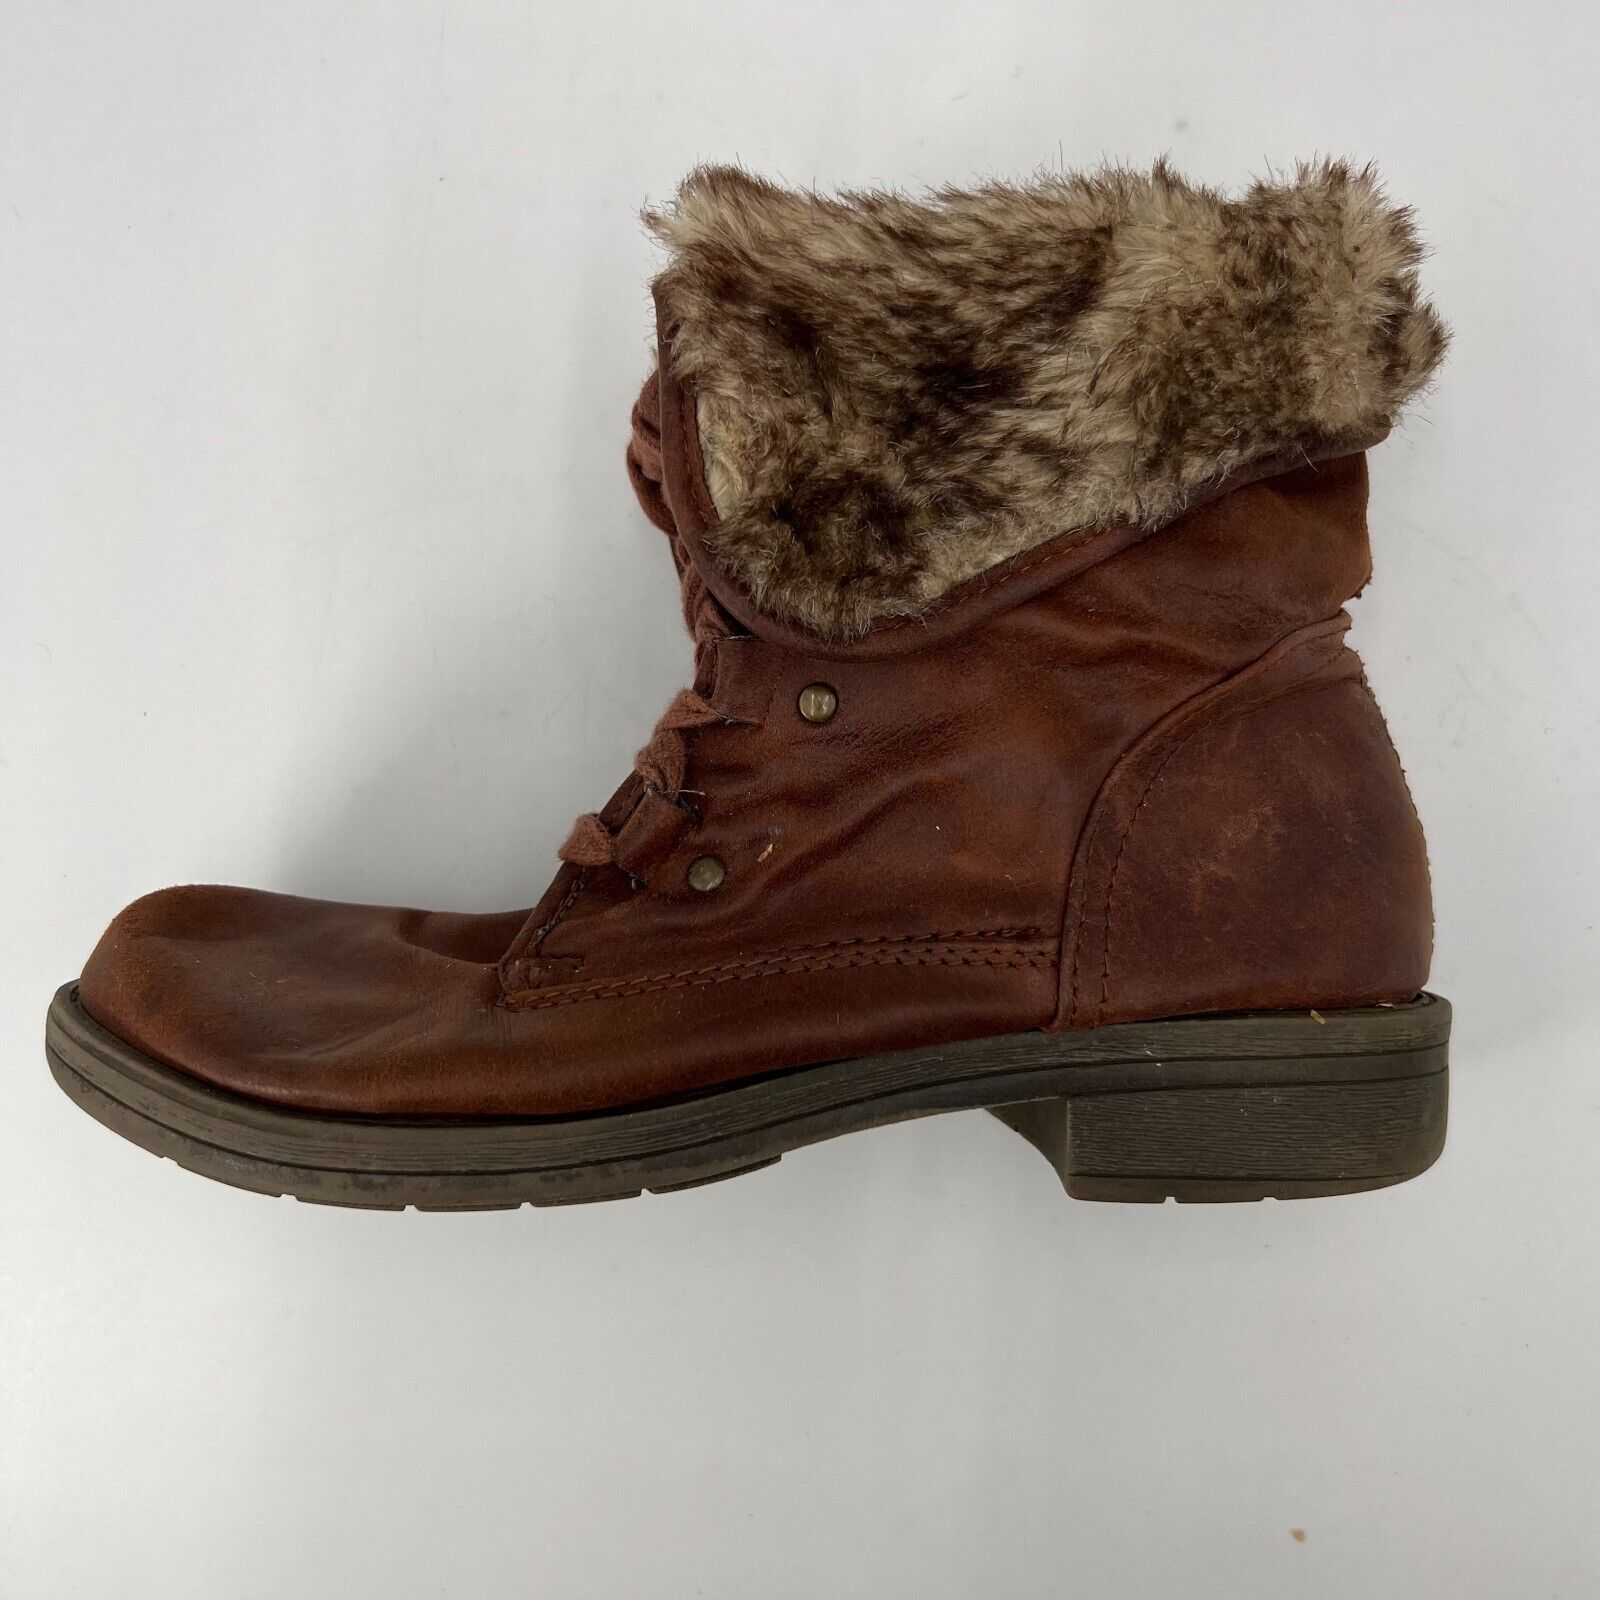 Brown Learher Combat Boots Lace Up Faux Fur Fold Over Snap Lining Womens Size 8.